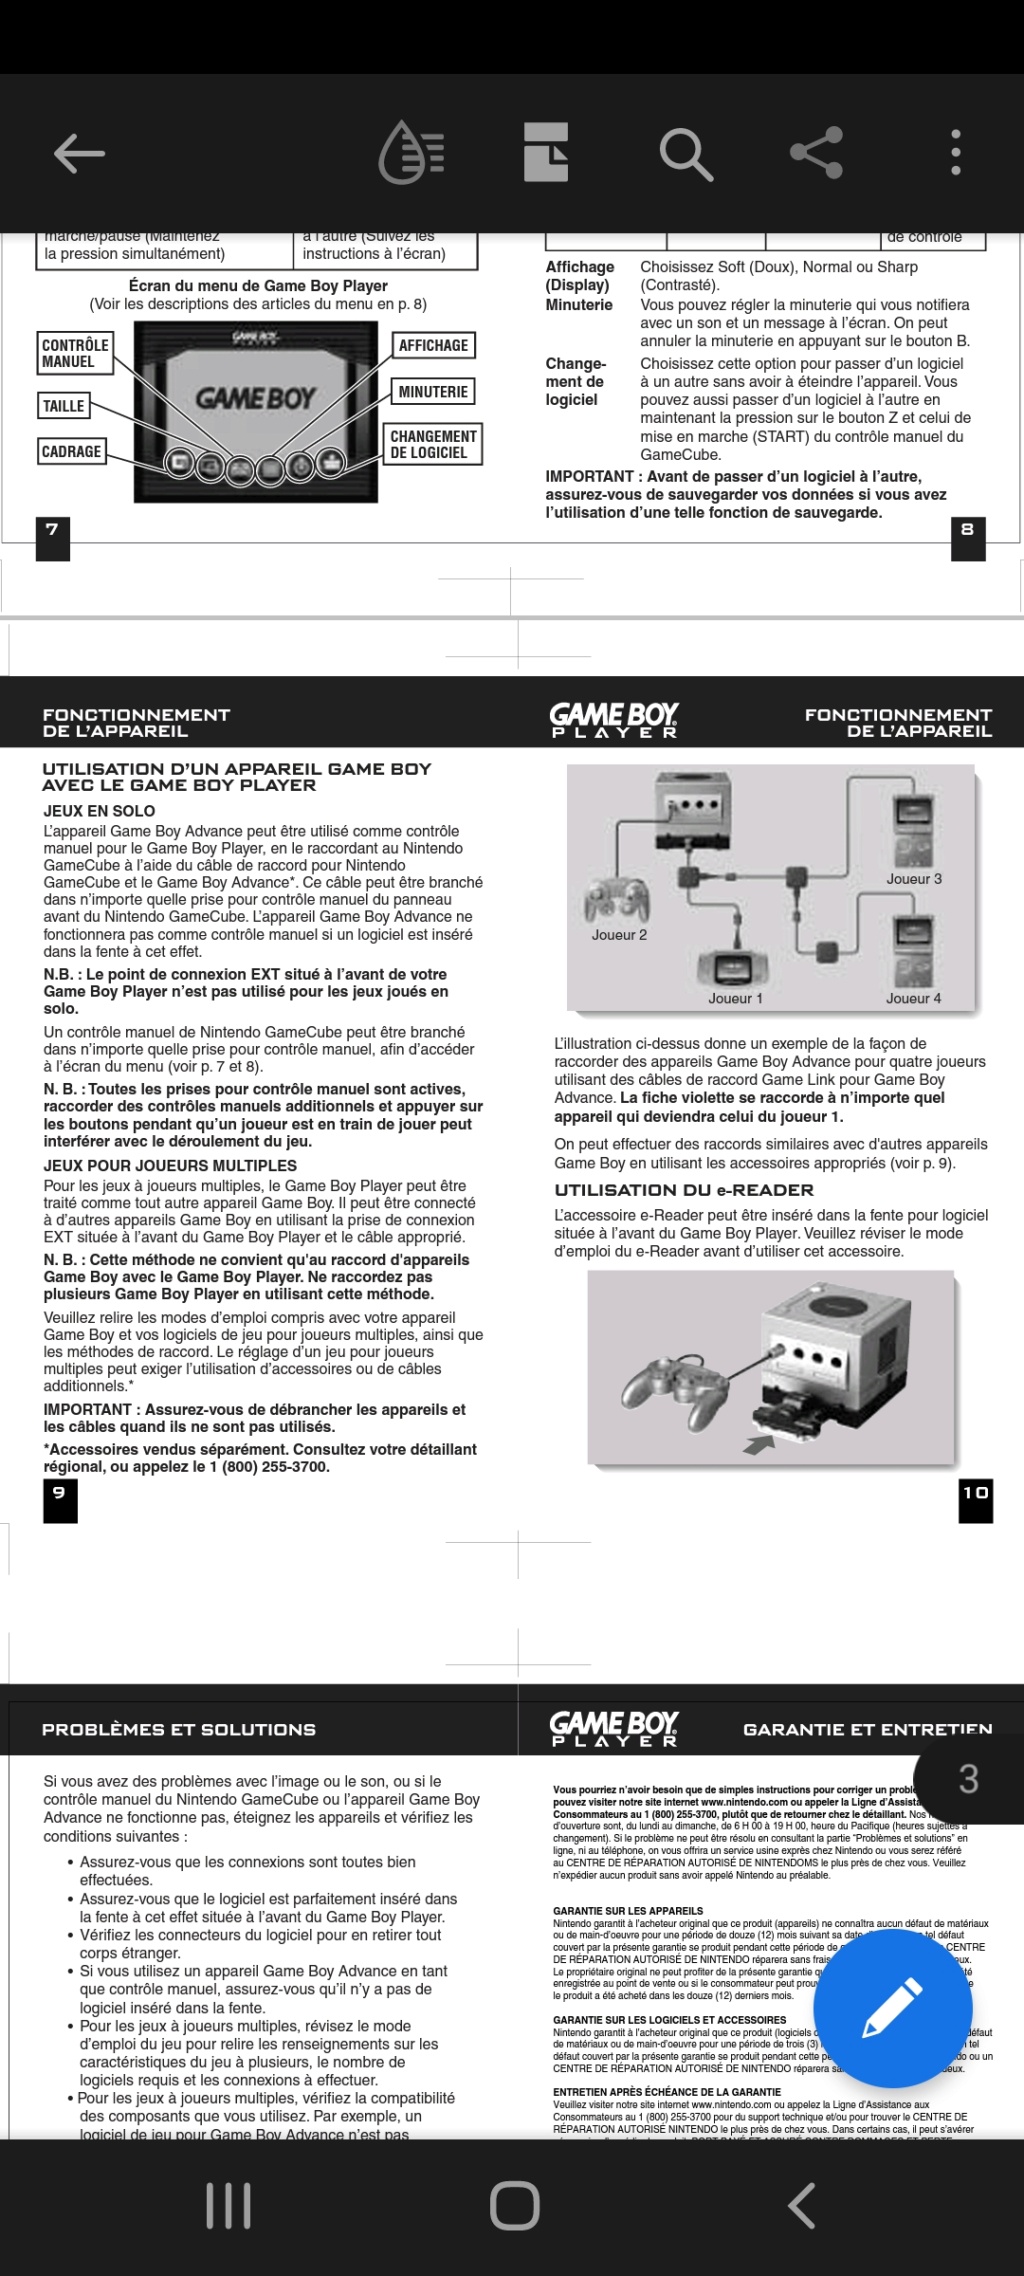 Gameboy Player Gamecube : boostez votre periph ! - Page 3 Screen19